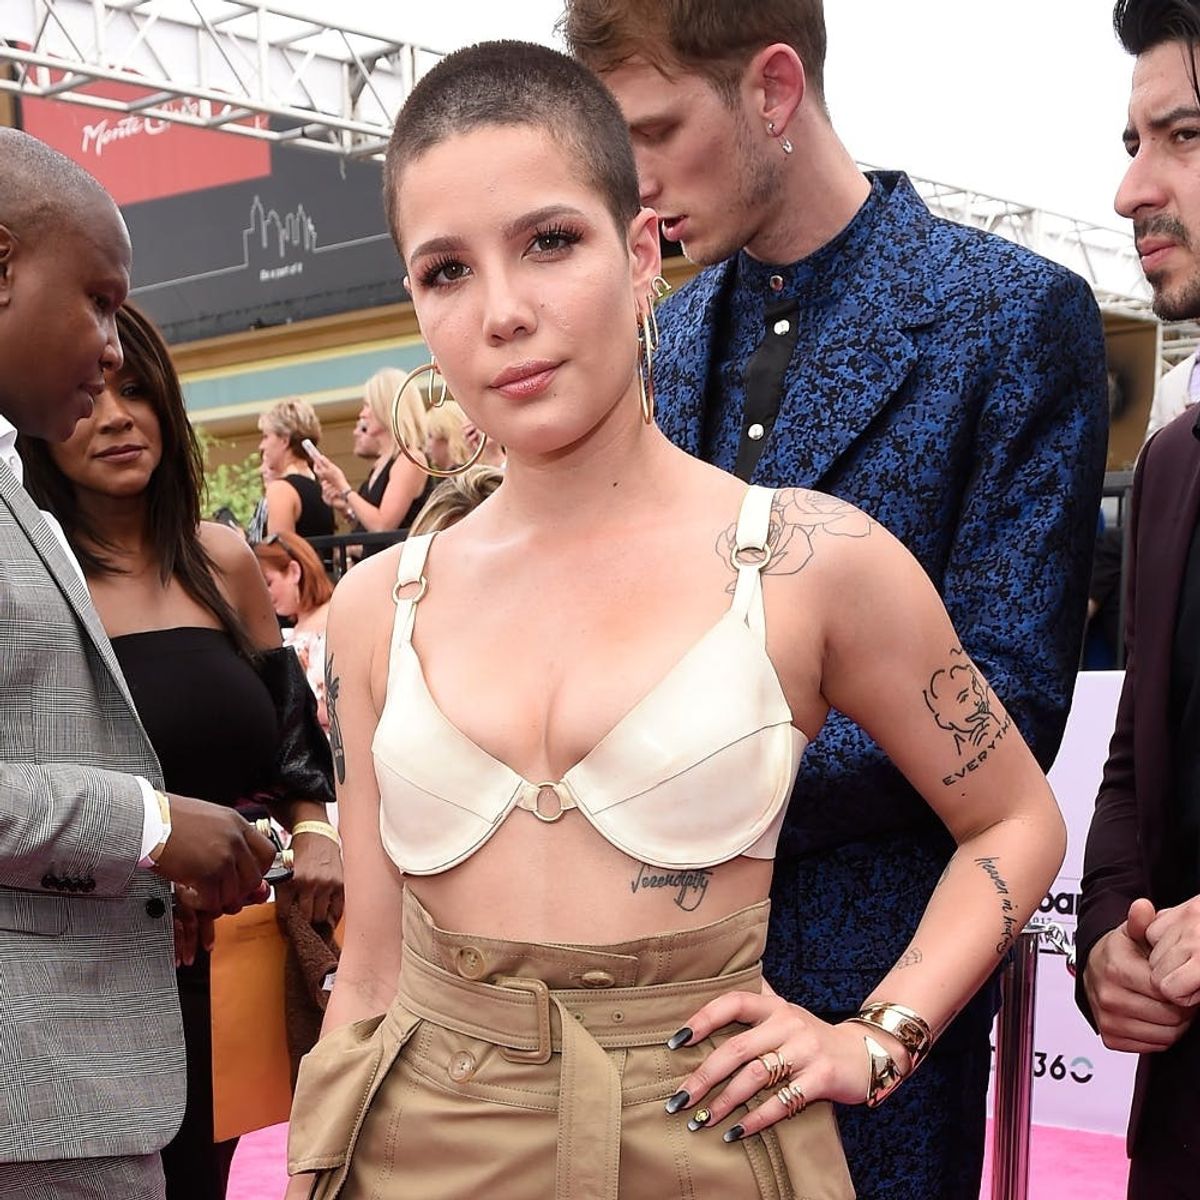 Halsey Just Totally Shaded Demi Lovato’s Music With an Insult of Her Lyrics